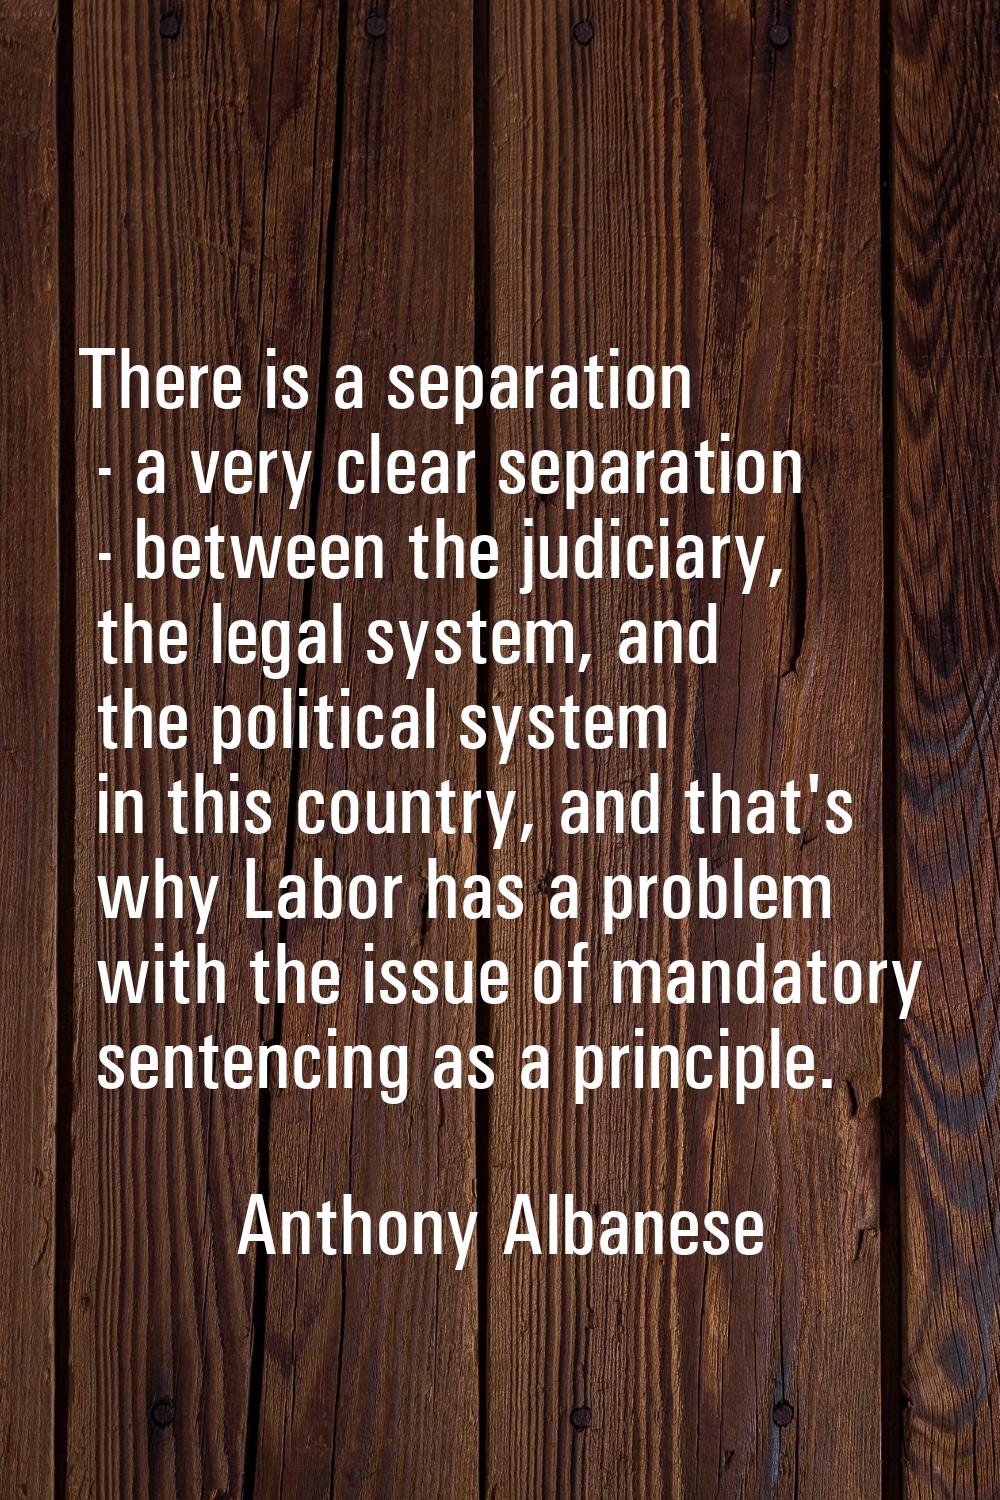 There is a separation - a very clear separation - between the judiciary, the legal system, and the 